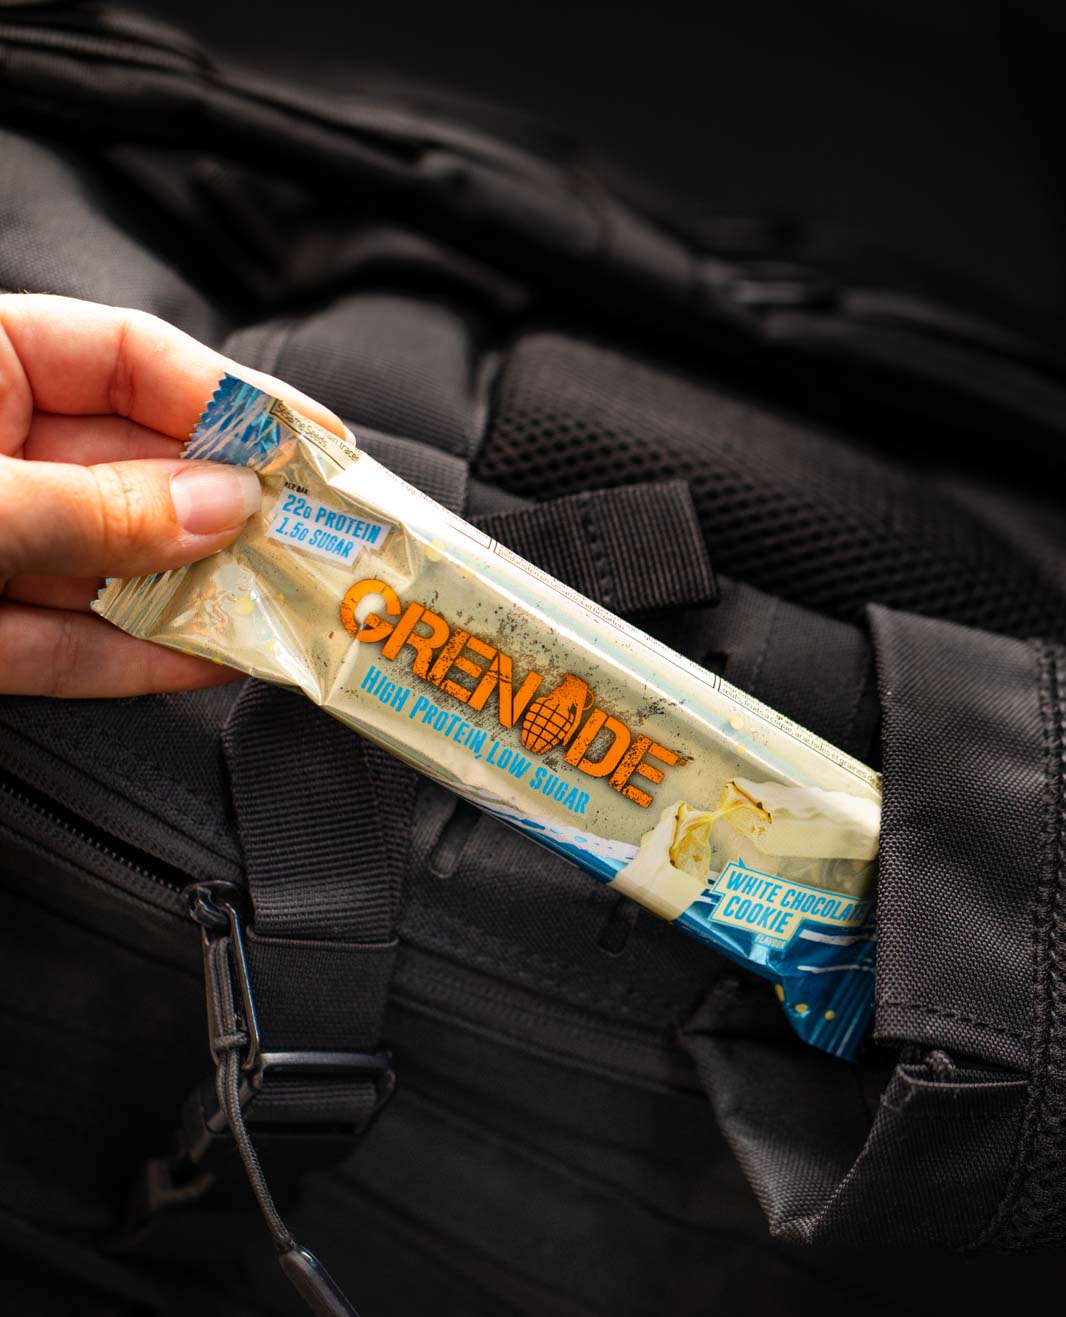 White Chocolate Protein Bar Out Of Bag Lifestyle Shot